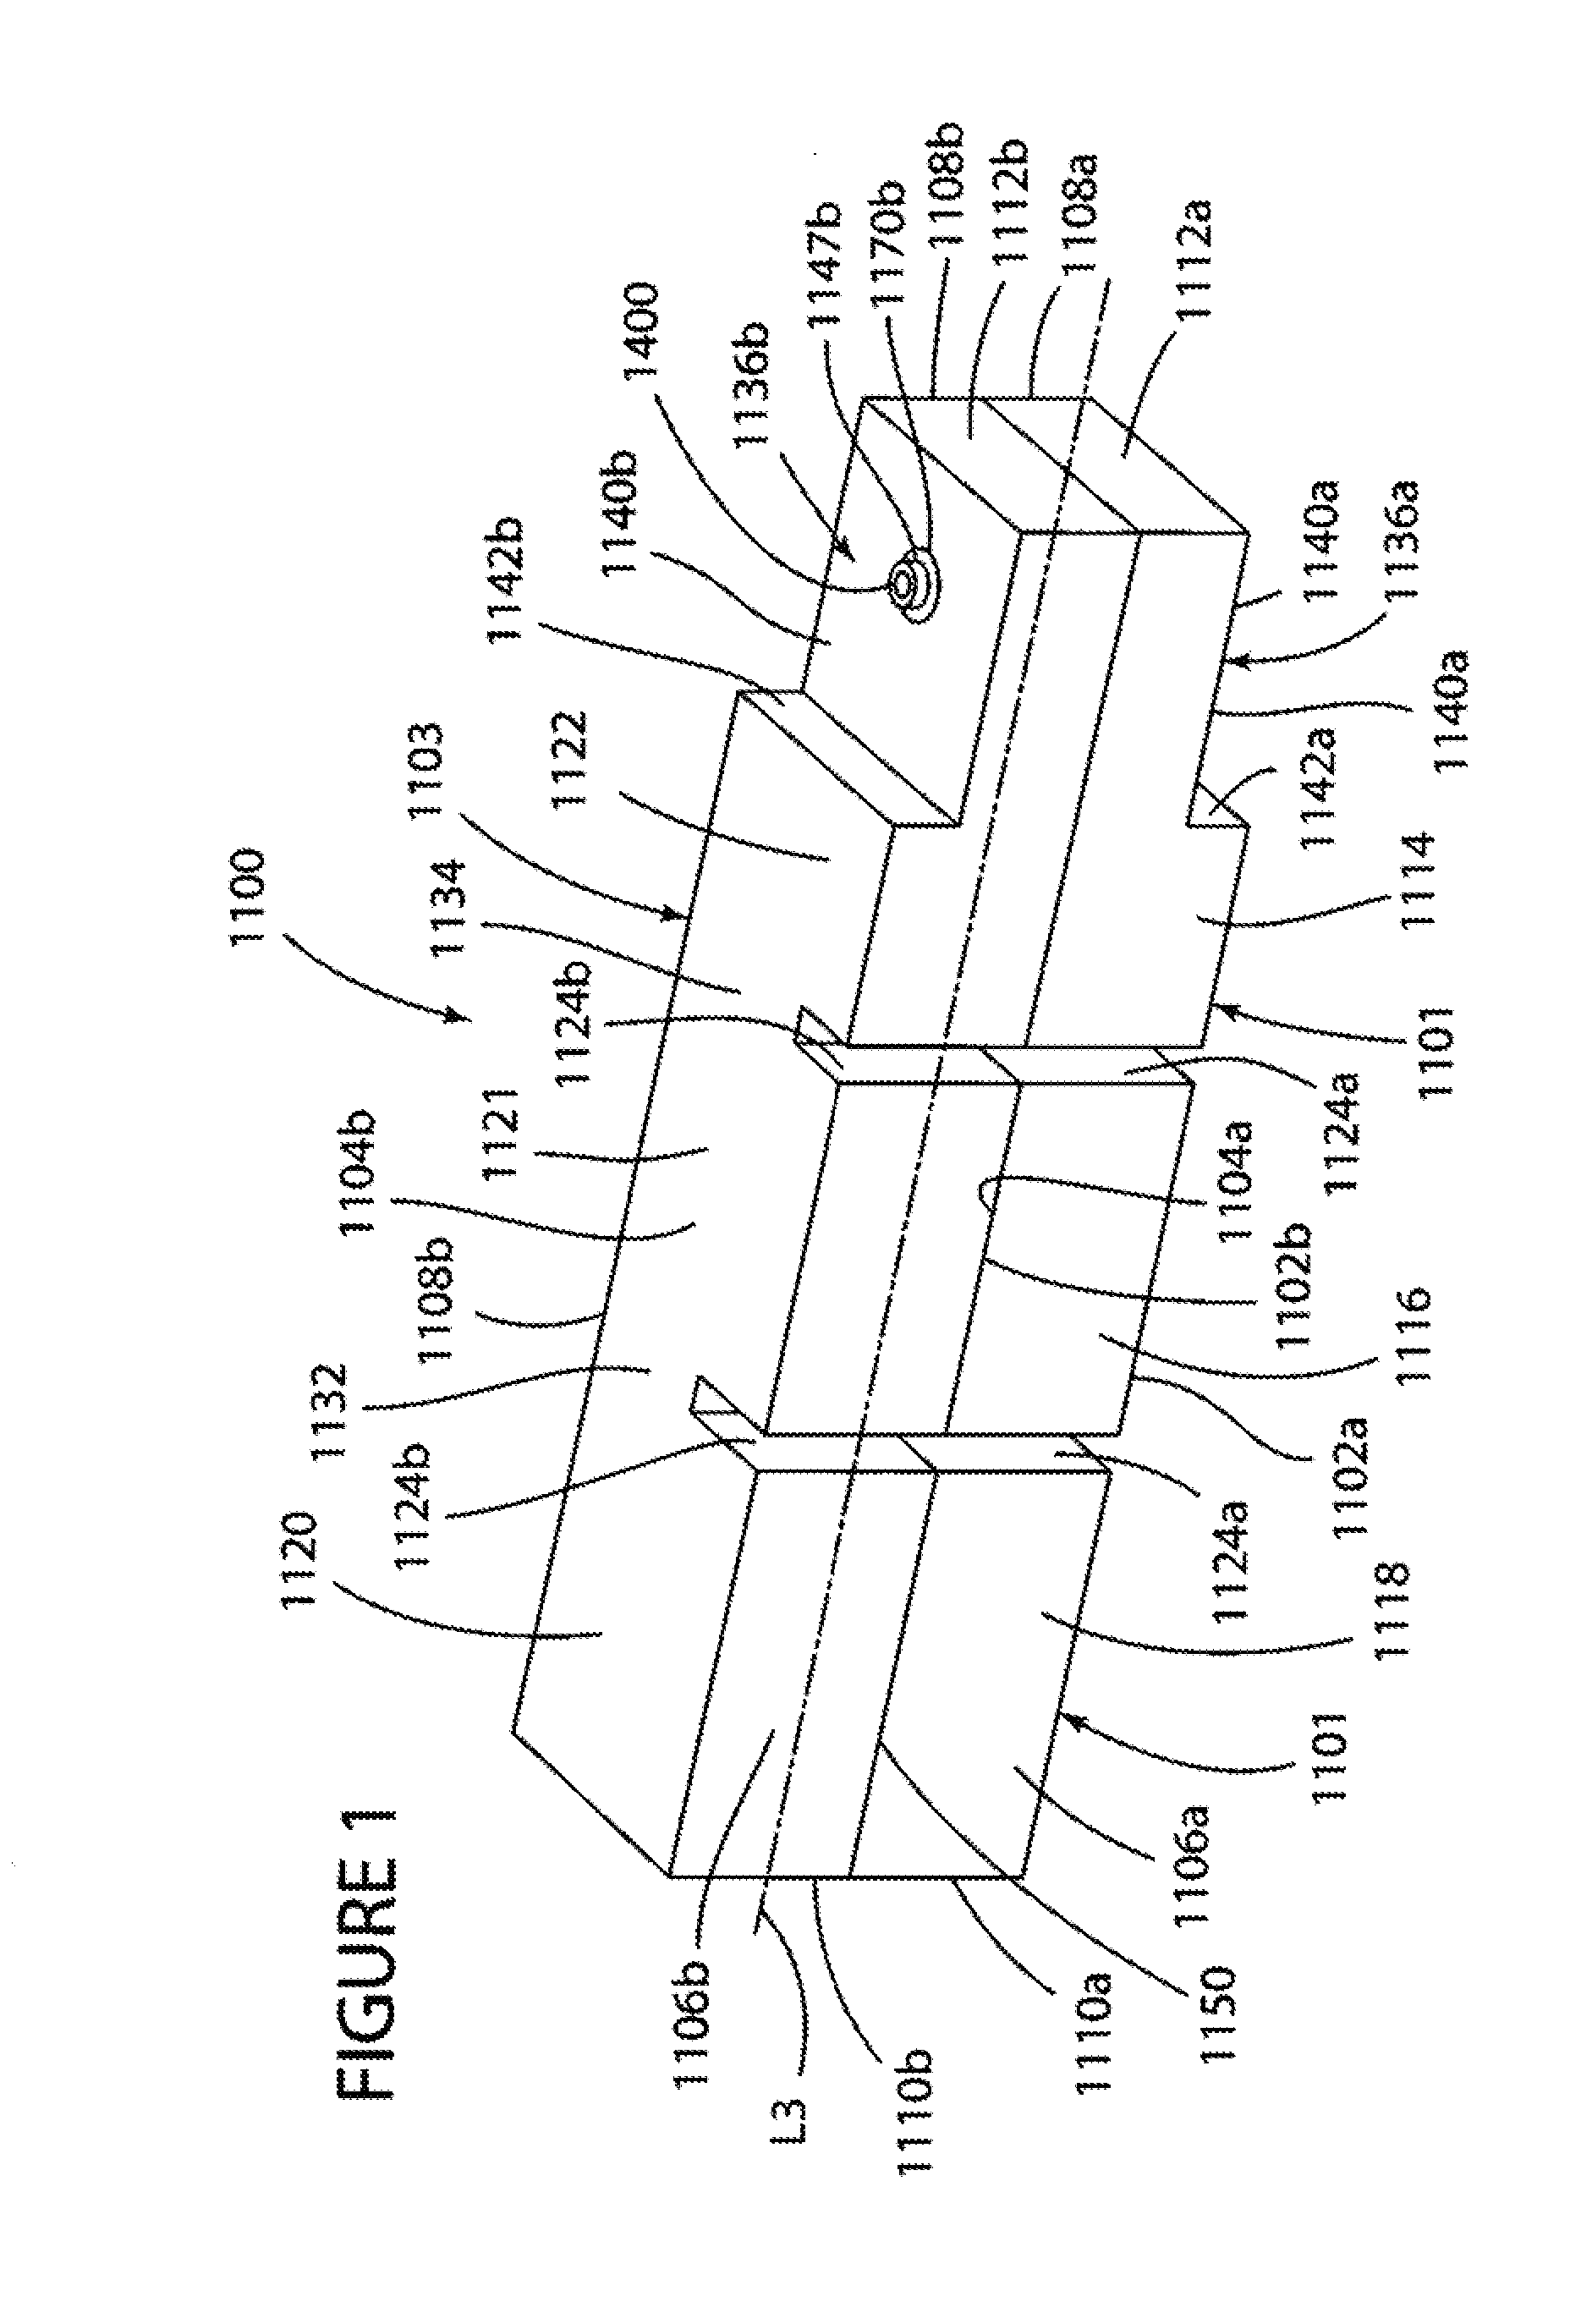 Dielectric Waveguide Filter with Direct Coupling and Alternative Cross-Coupling